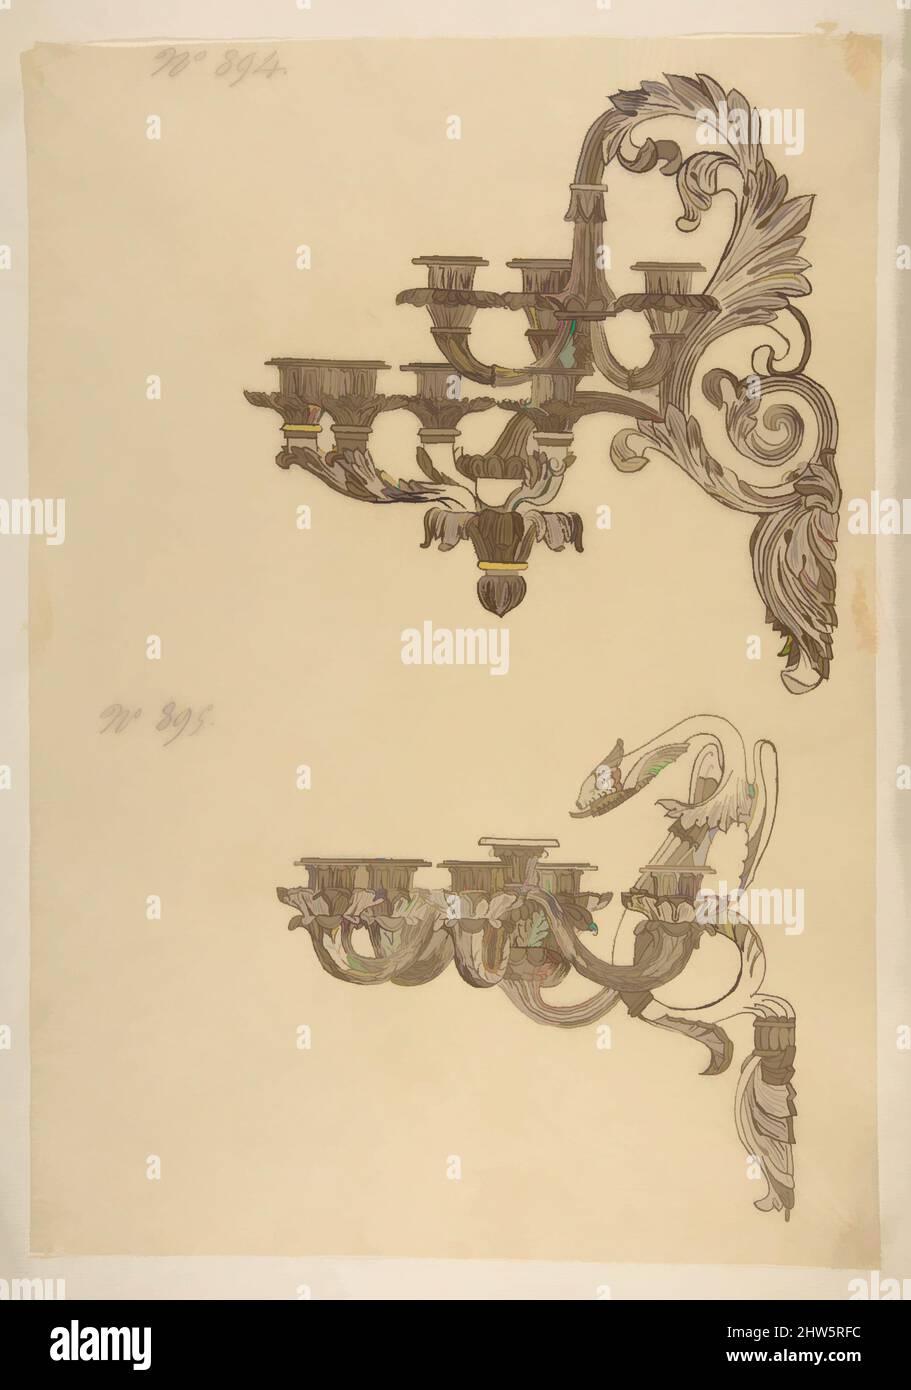 Art inspired by Designs for Two Sconces, 19th century, Pen and brown ink, image: 14 1/2 x 10 1/4 in. (36.9 x 26.1 cm), Drawings, Anonymous, French, 19th century, Classic works modernized by Artotop with a splash of modernity. Shapes, color and value, eye-catching visual impact on art. Emotions through freedom of artworks in a contemporary way. A timeless message pursuing a wildly creative new direction. Artists turning to the digital medium and creating the Artotop NFT Stock Photo